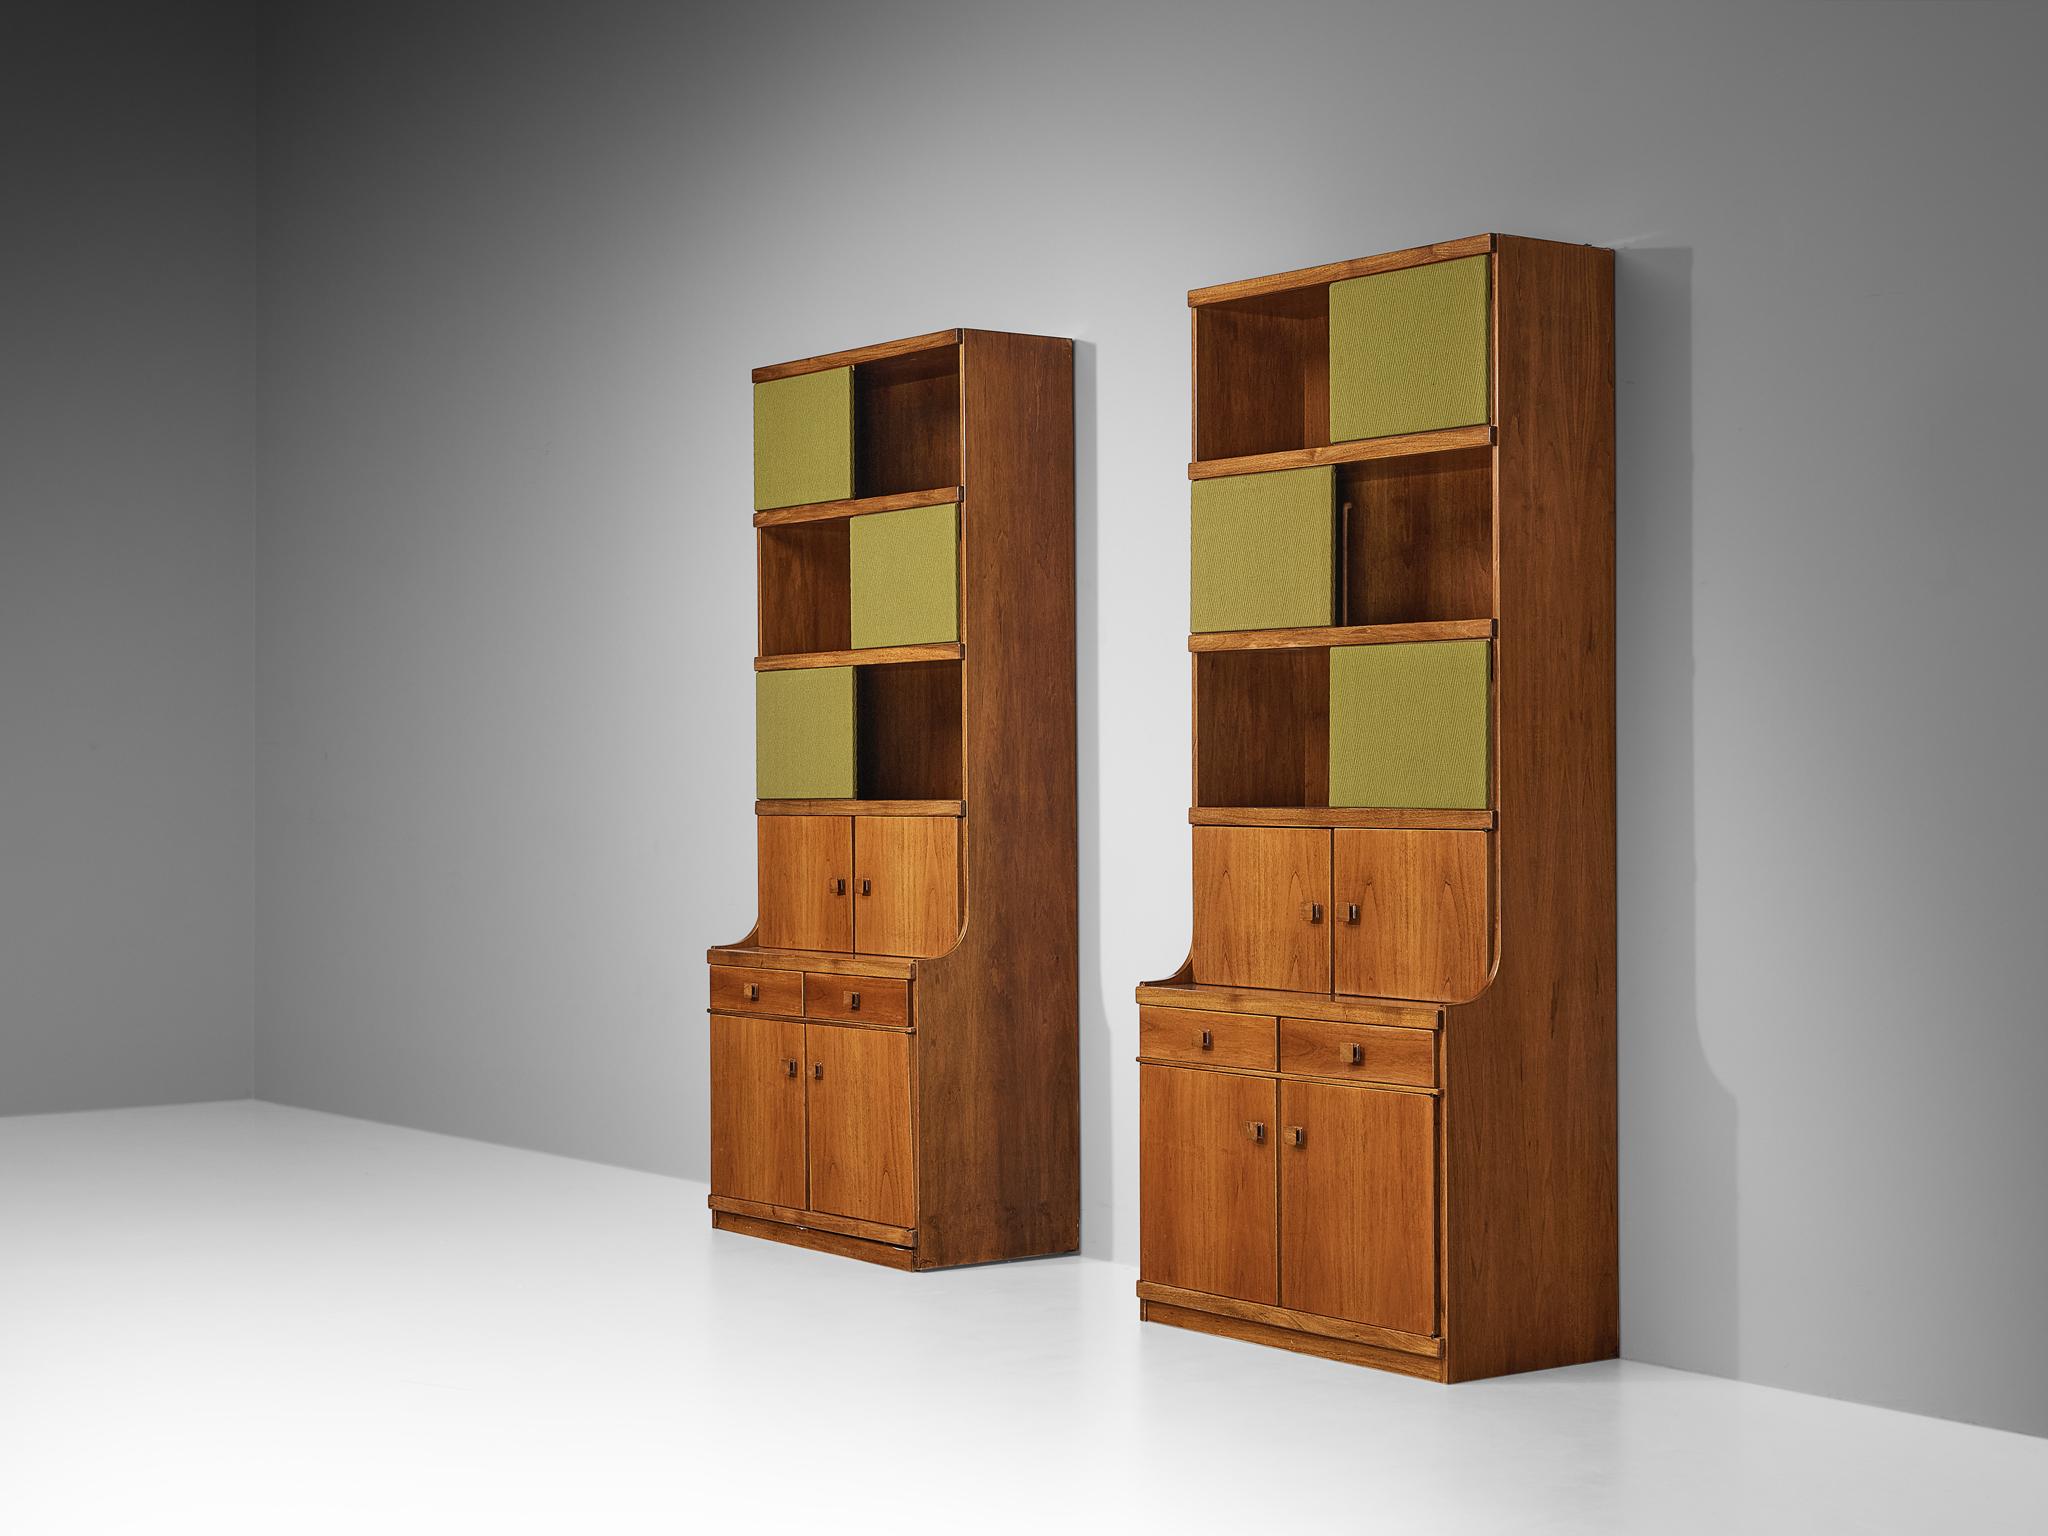 IImari Tapiovaara for La Permanente Mobili Cantù, bookcase, walnut, fabric, Italy, design 1957

This grand bookcase executed in walnut is designed by the Finnish designer Ilmari Tapiovaara for Permanente Mobili Cantù. The clean lines allow you to